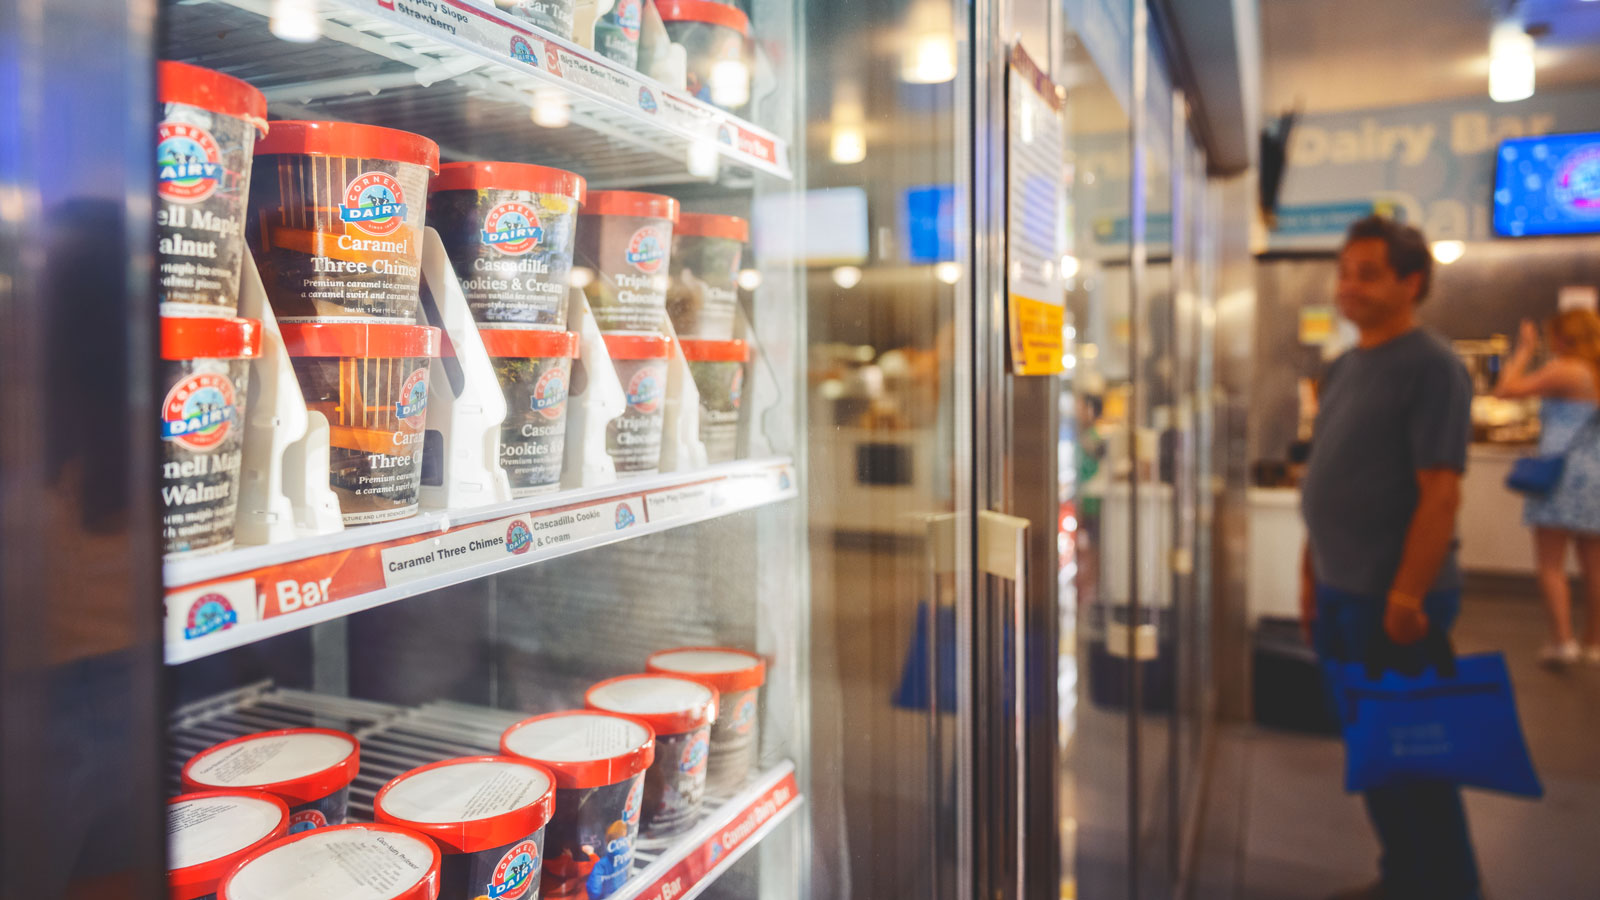 Ice cream pints in a fridge on sale at the Cornell Dairy Bar